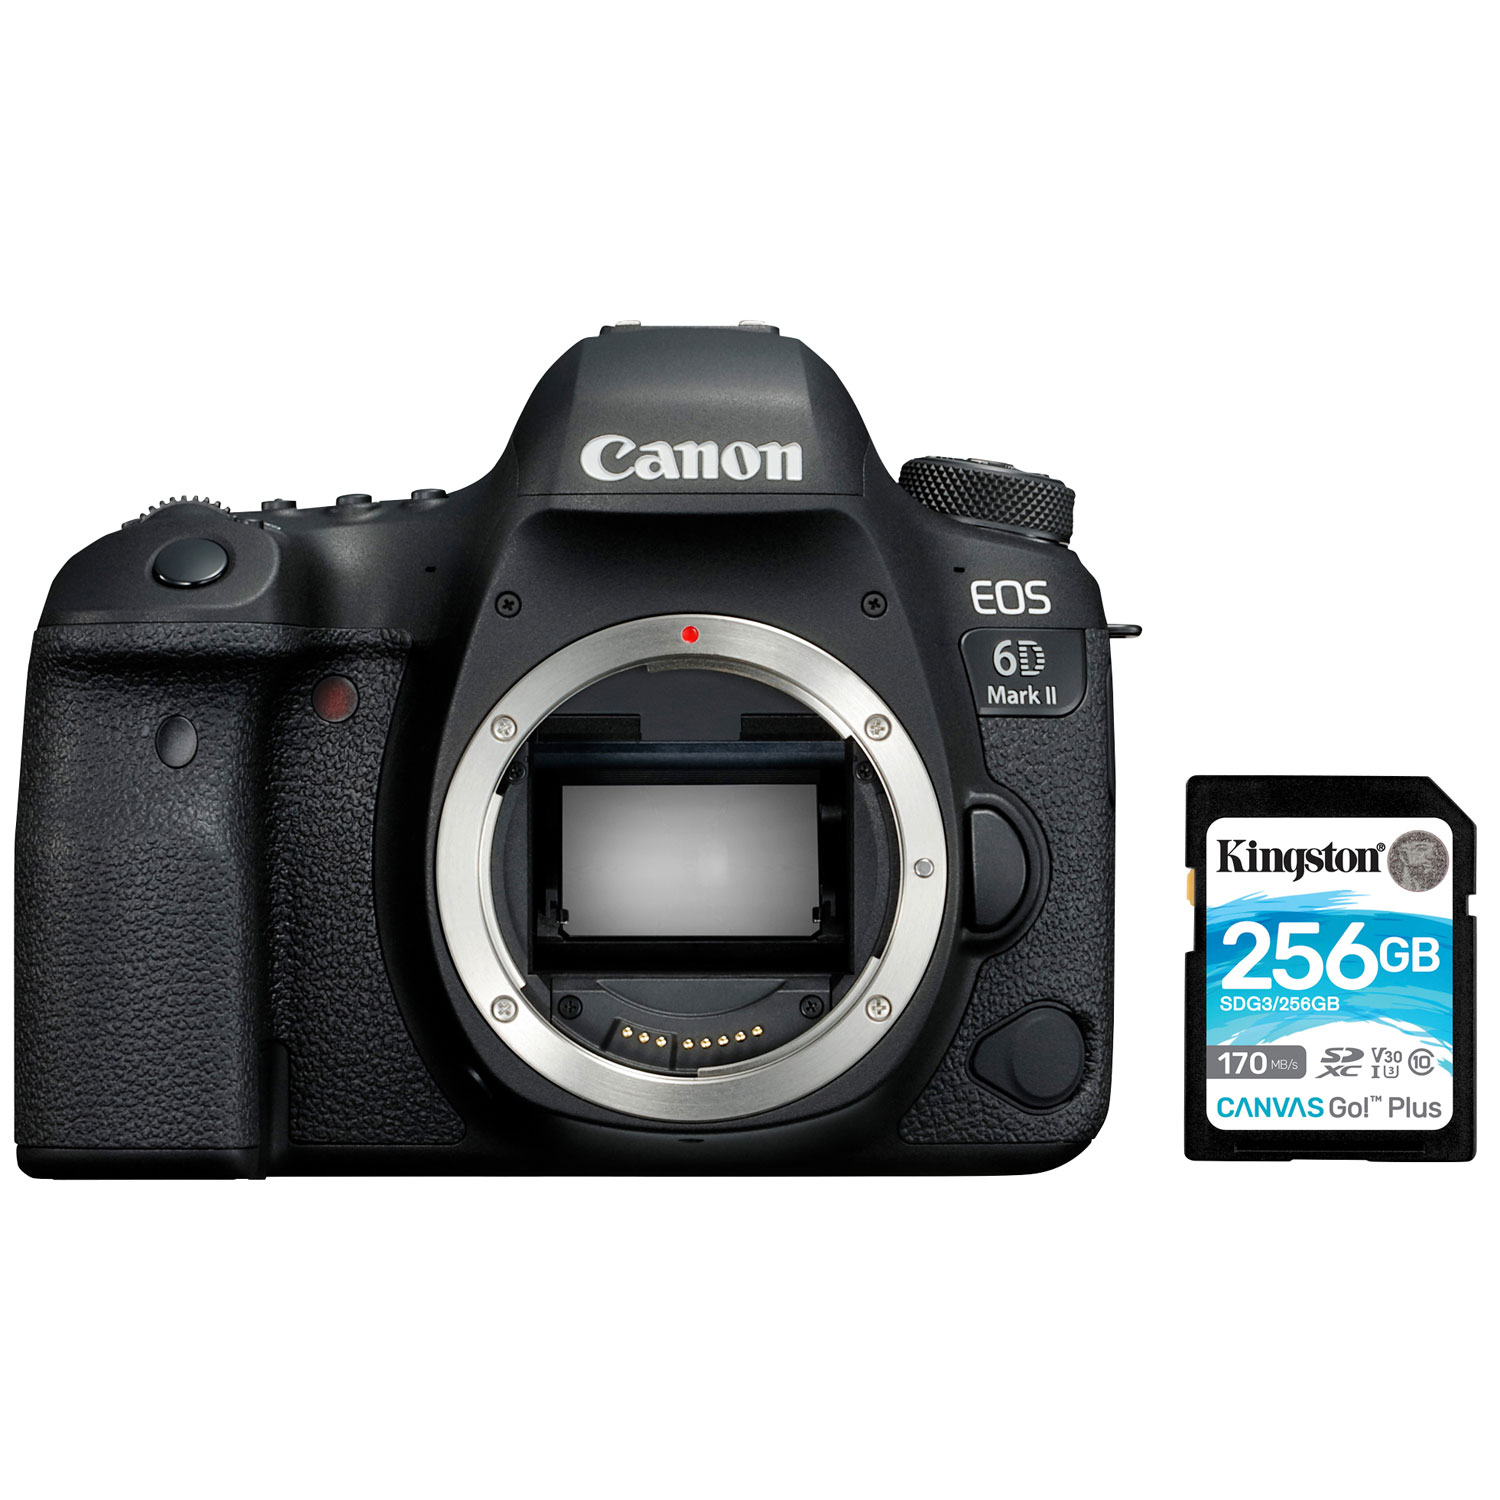 Canon EOS 6D Mark II DSLR Full Frame DSLR Camera (Body Only) with 256GB Memory Card